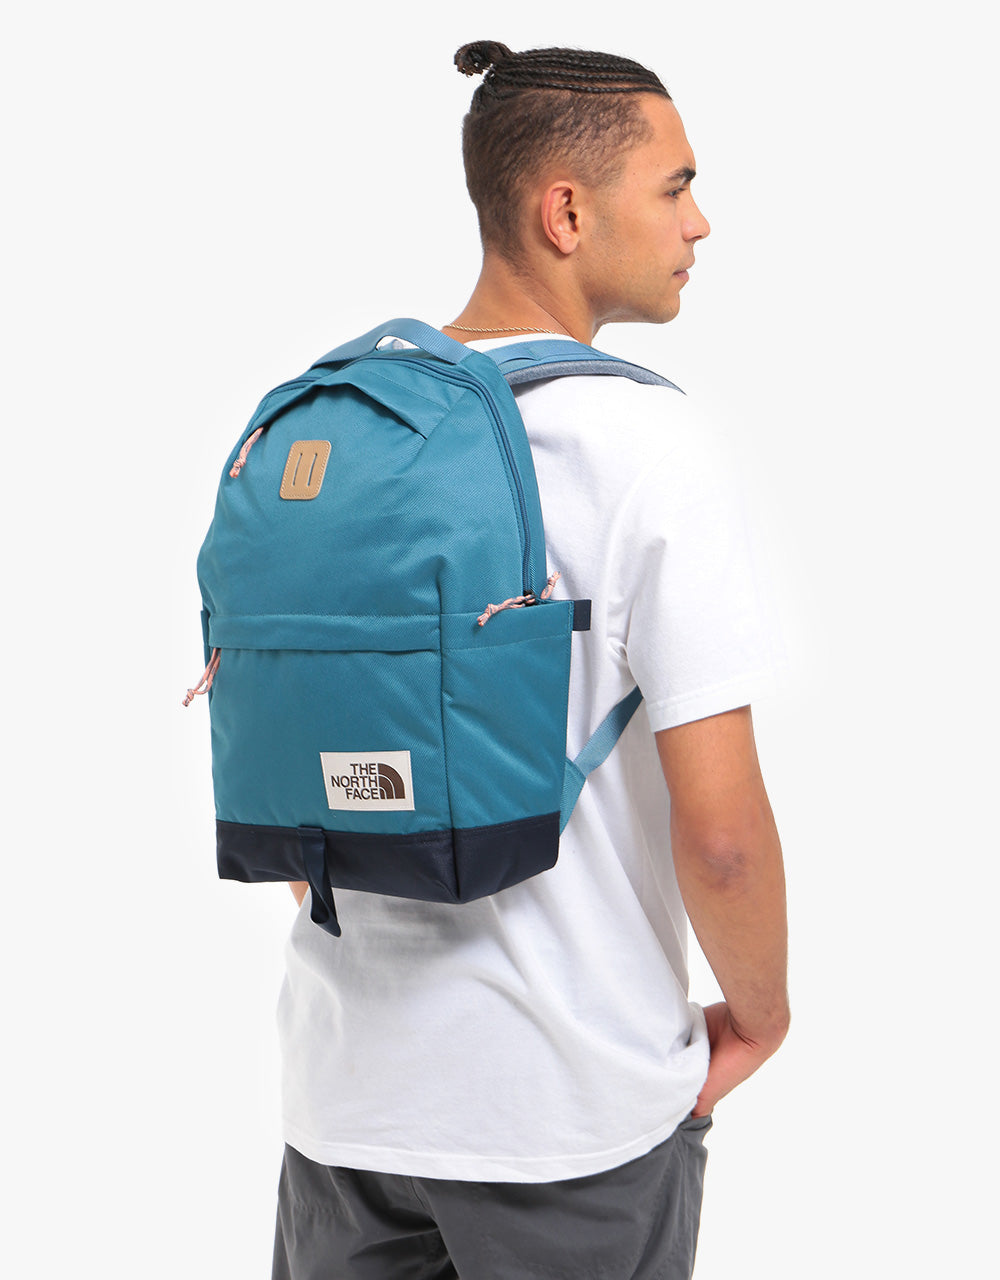 north face day pack backpack